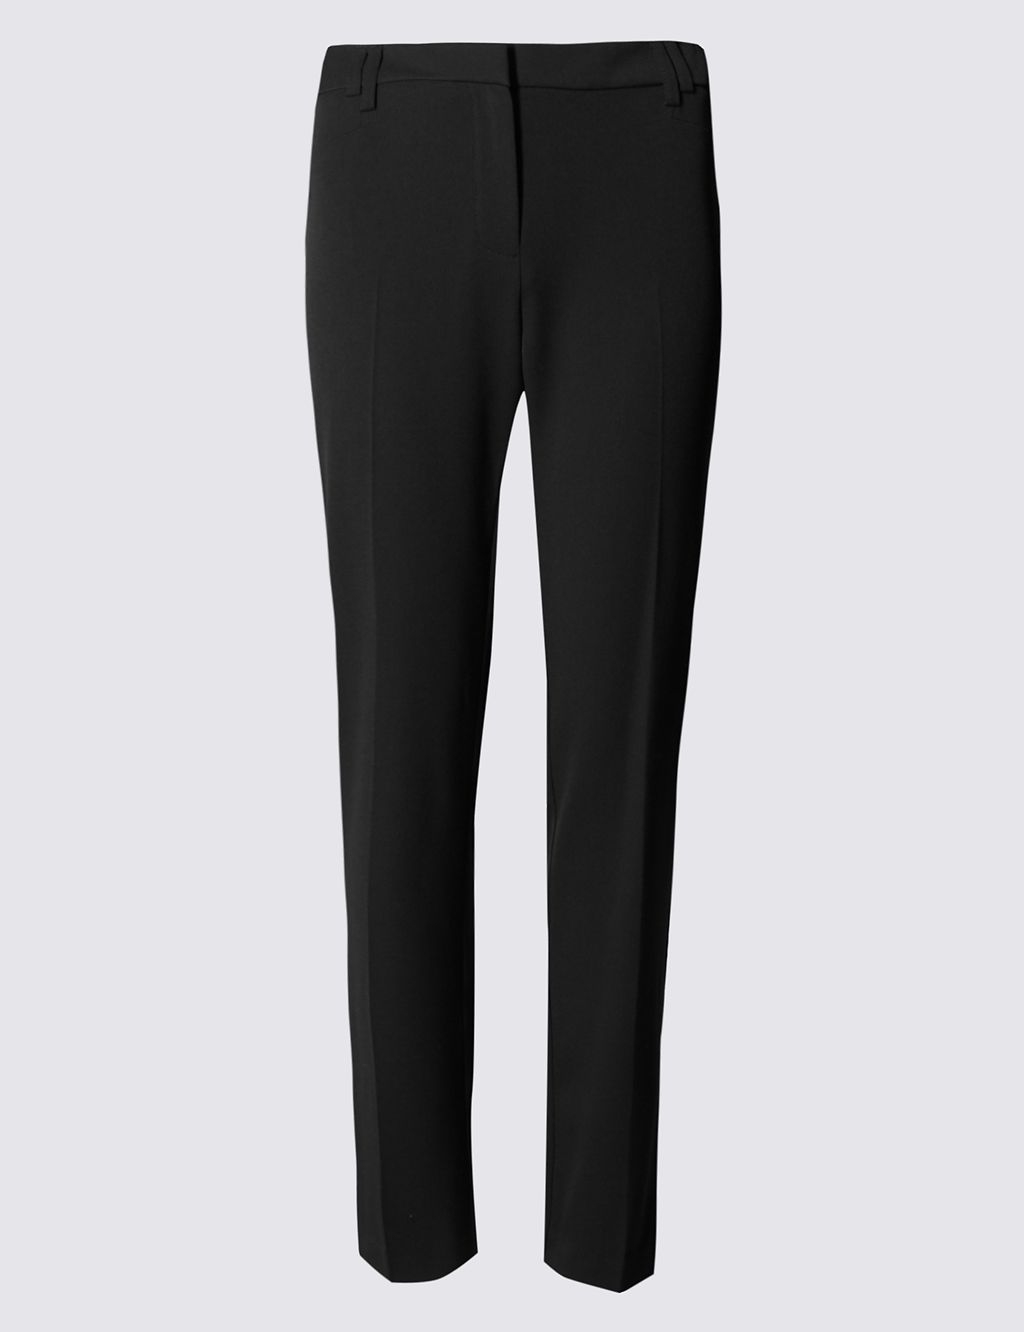 Staggered Seam Slim Leg Trousers 1 of 3